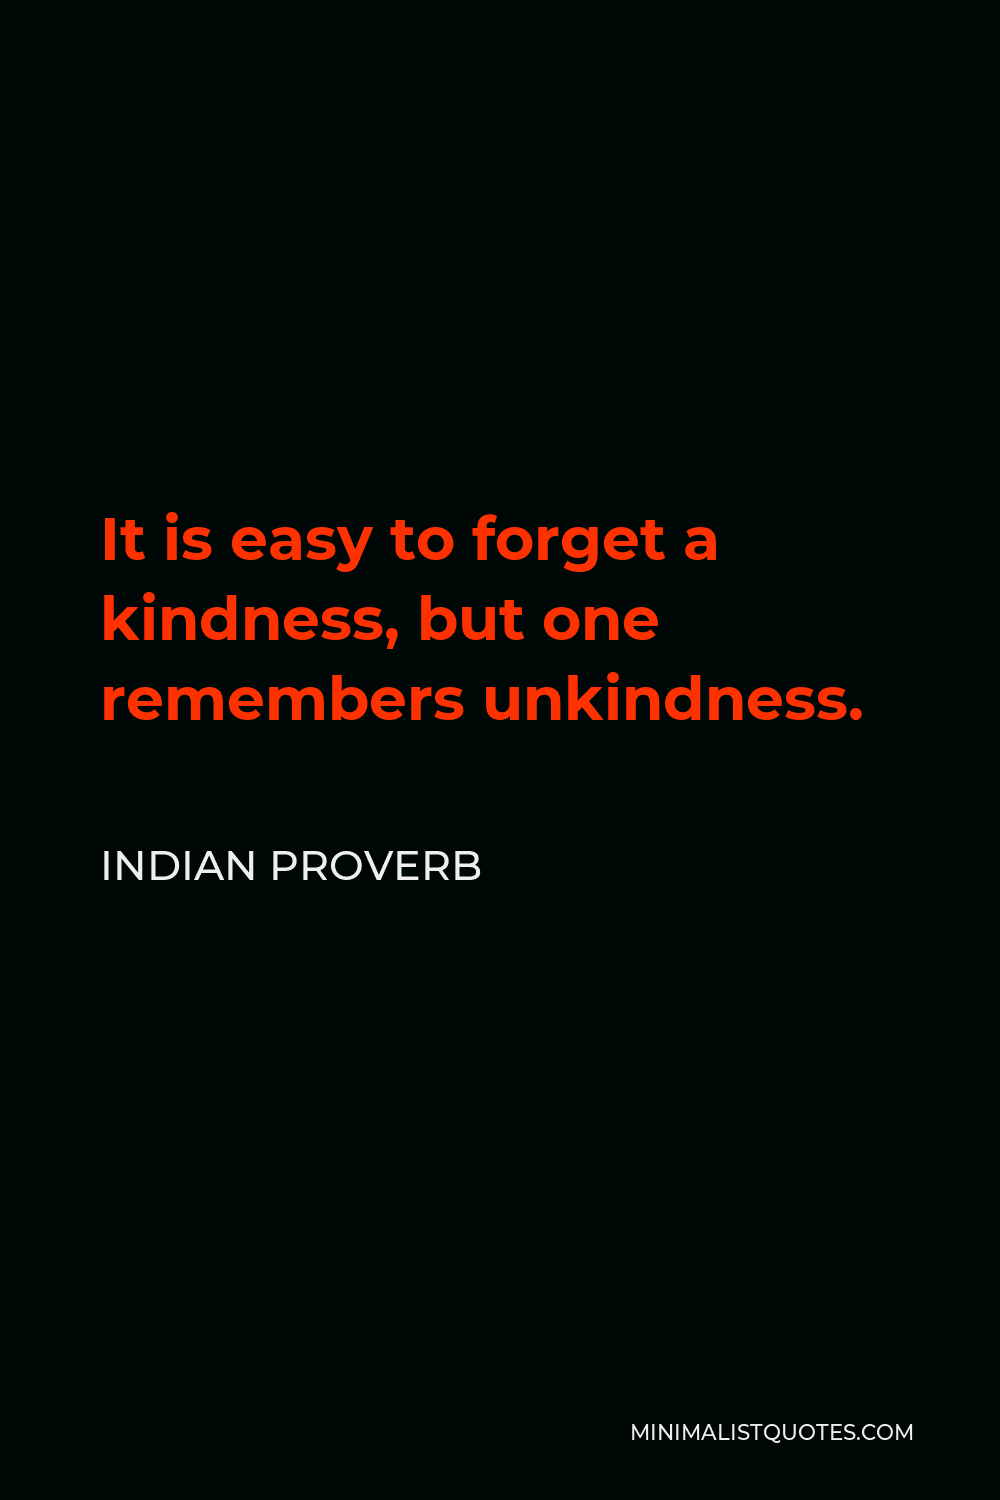 Indian Proverb Quote - It is easy to forget a kindness, but one remembers unkindness.